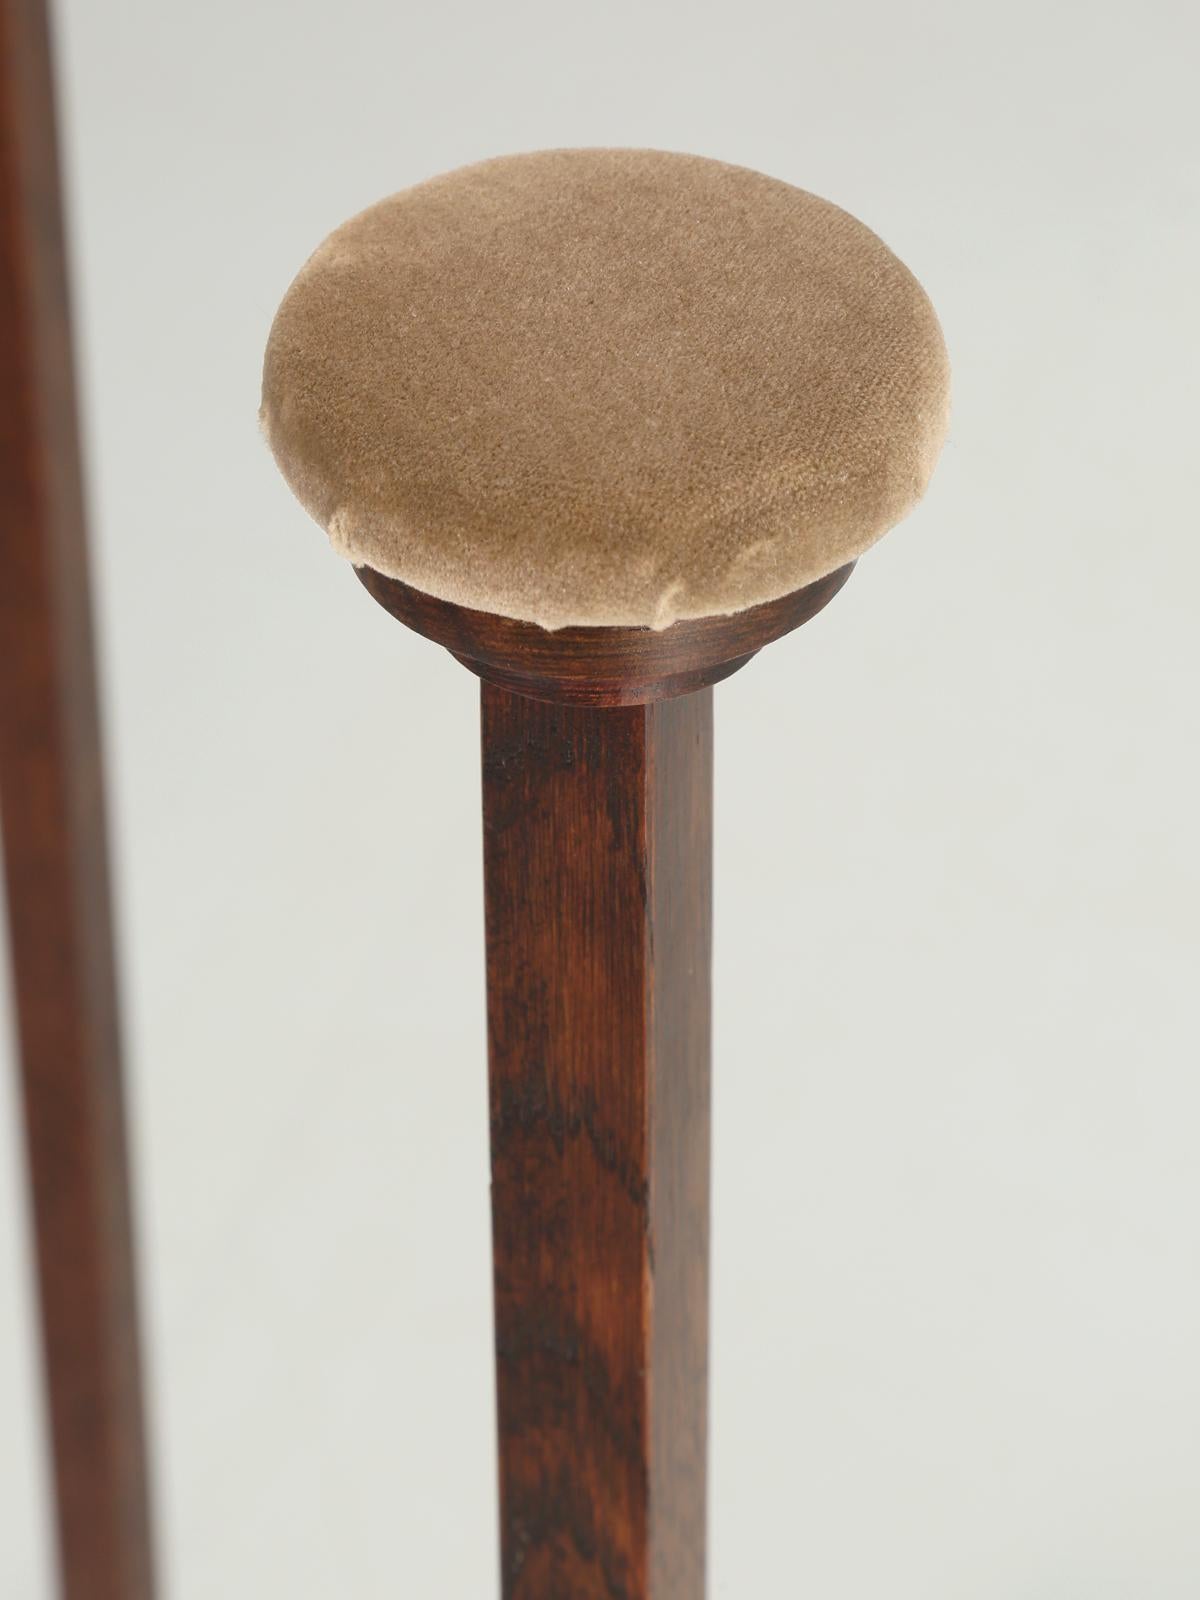 Set of '3' Hat Stands Made of White Oak with Weighted Bottoms for Stability In Good Condition For Sale In Chicago, IL